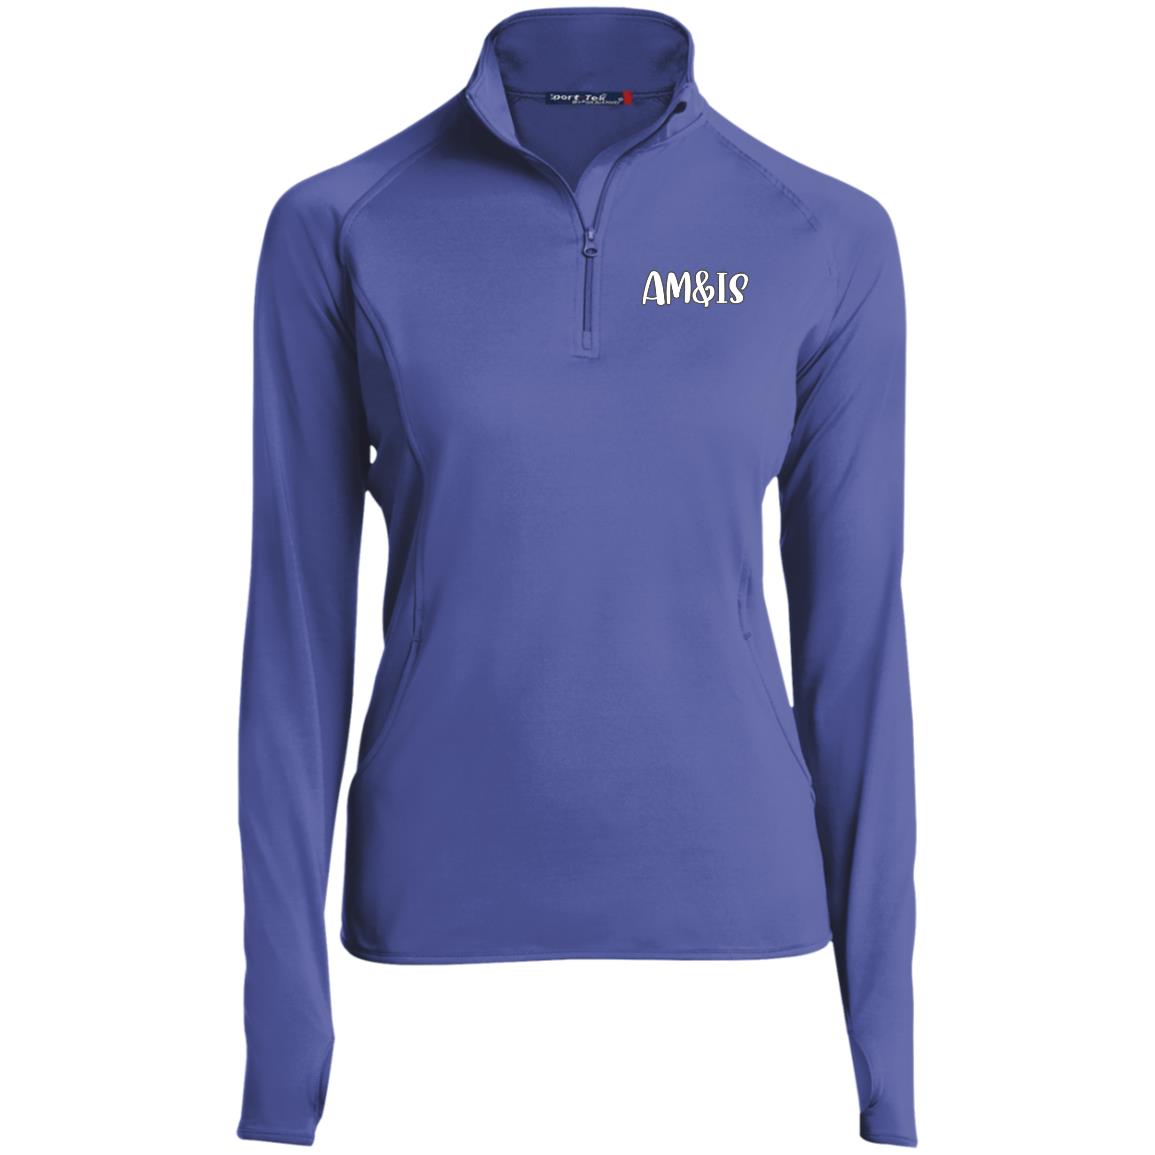 IRIS PURPLE - AM&IS Activewear Ladies' 1/2 Zip Performance Pullover - womens shirt at TFC&H Co.